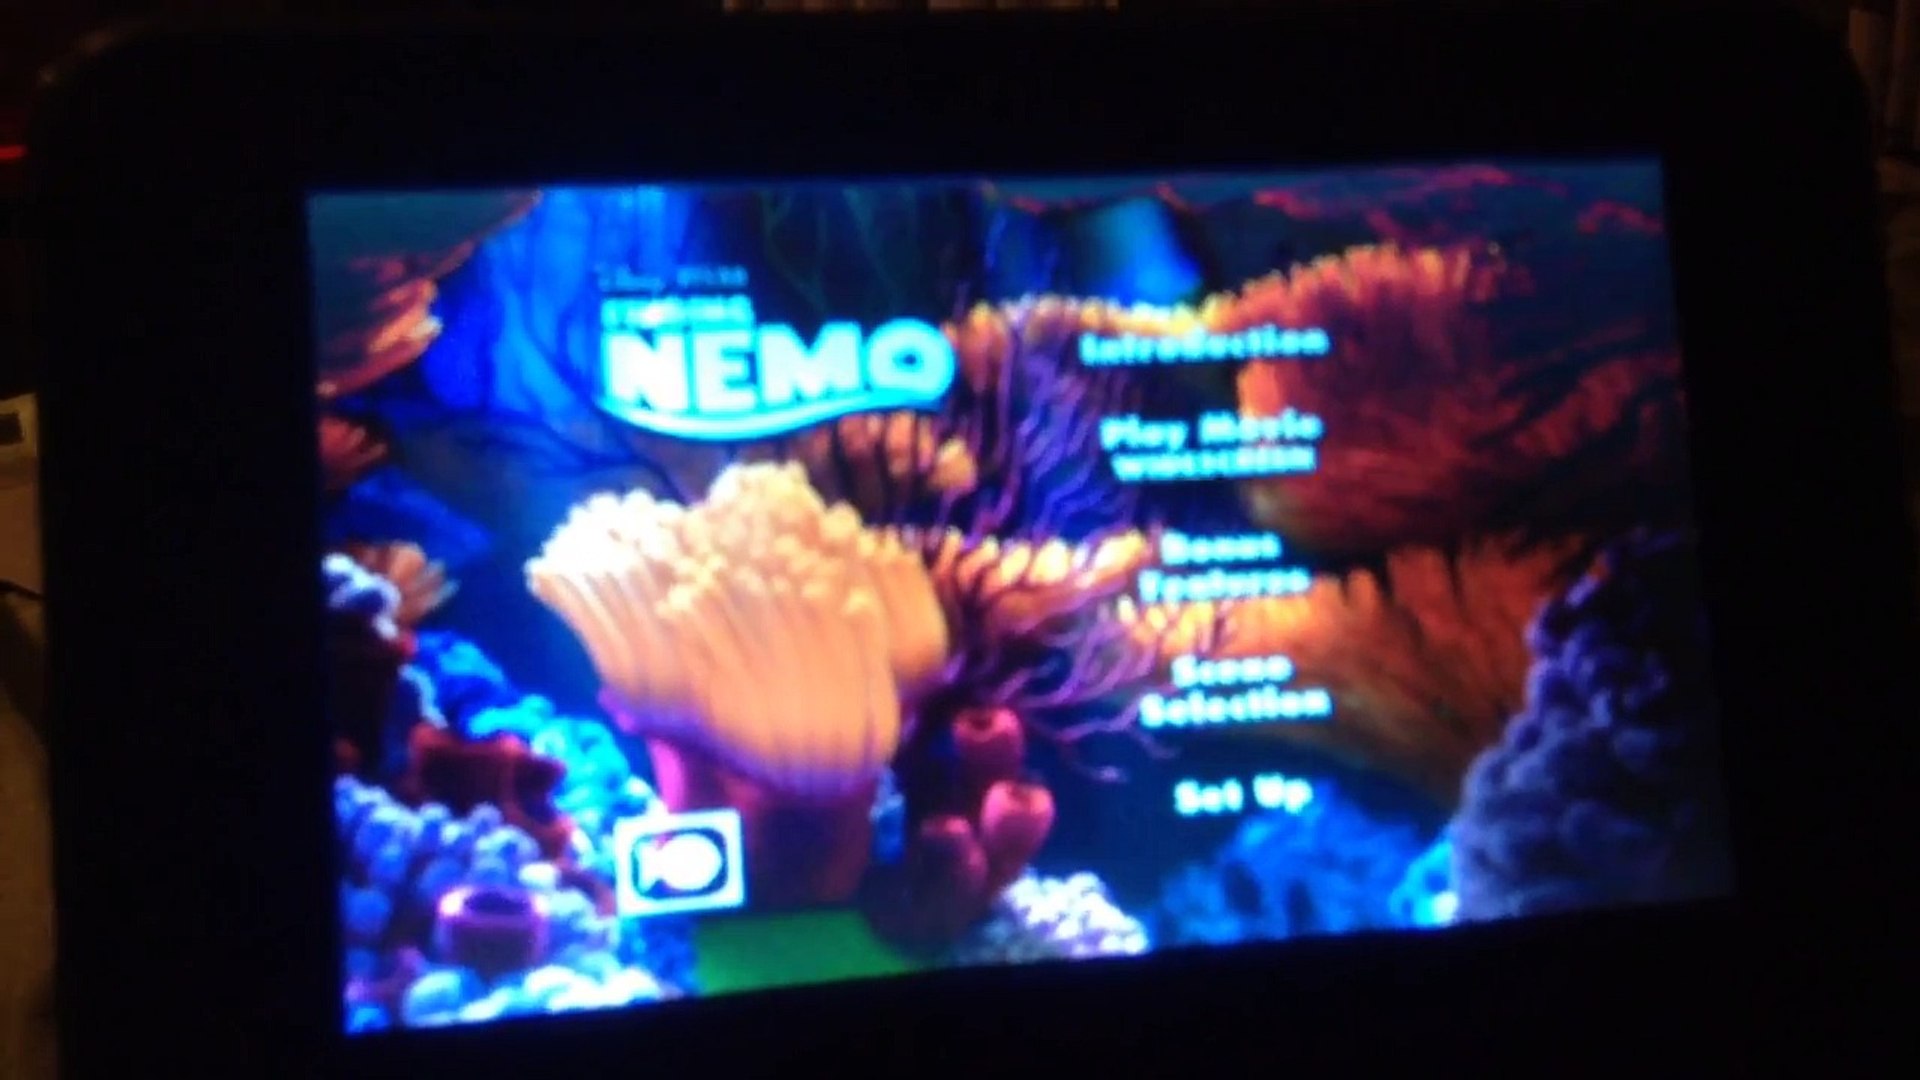 Opening to Finding Nemo Disc 1 2003 DVD - video Dailymotion